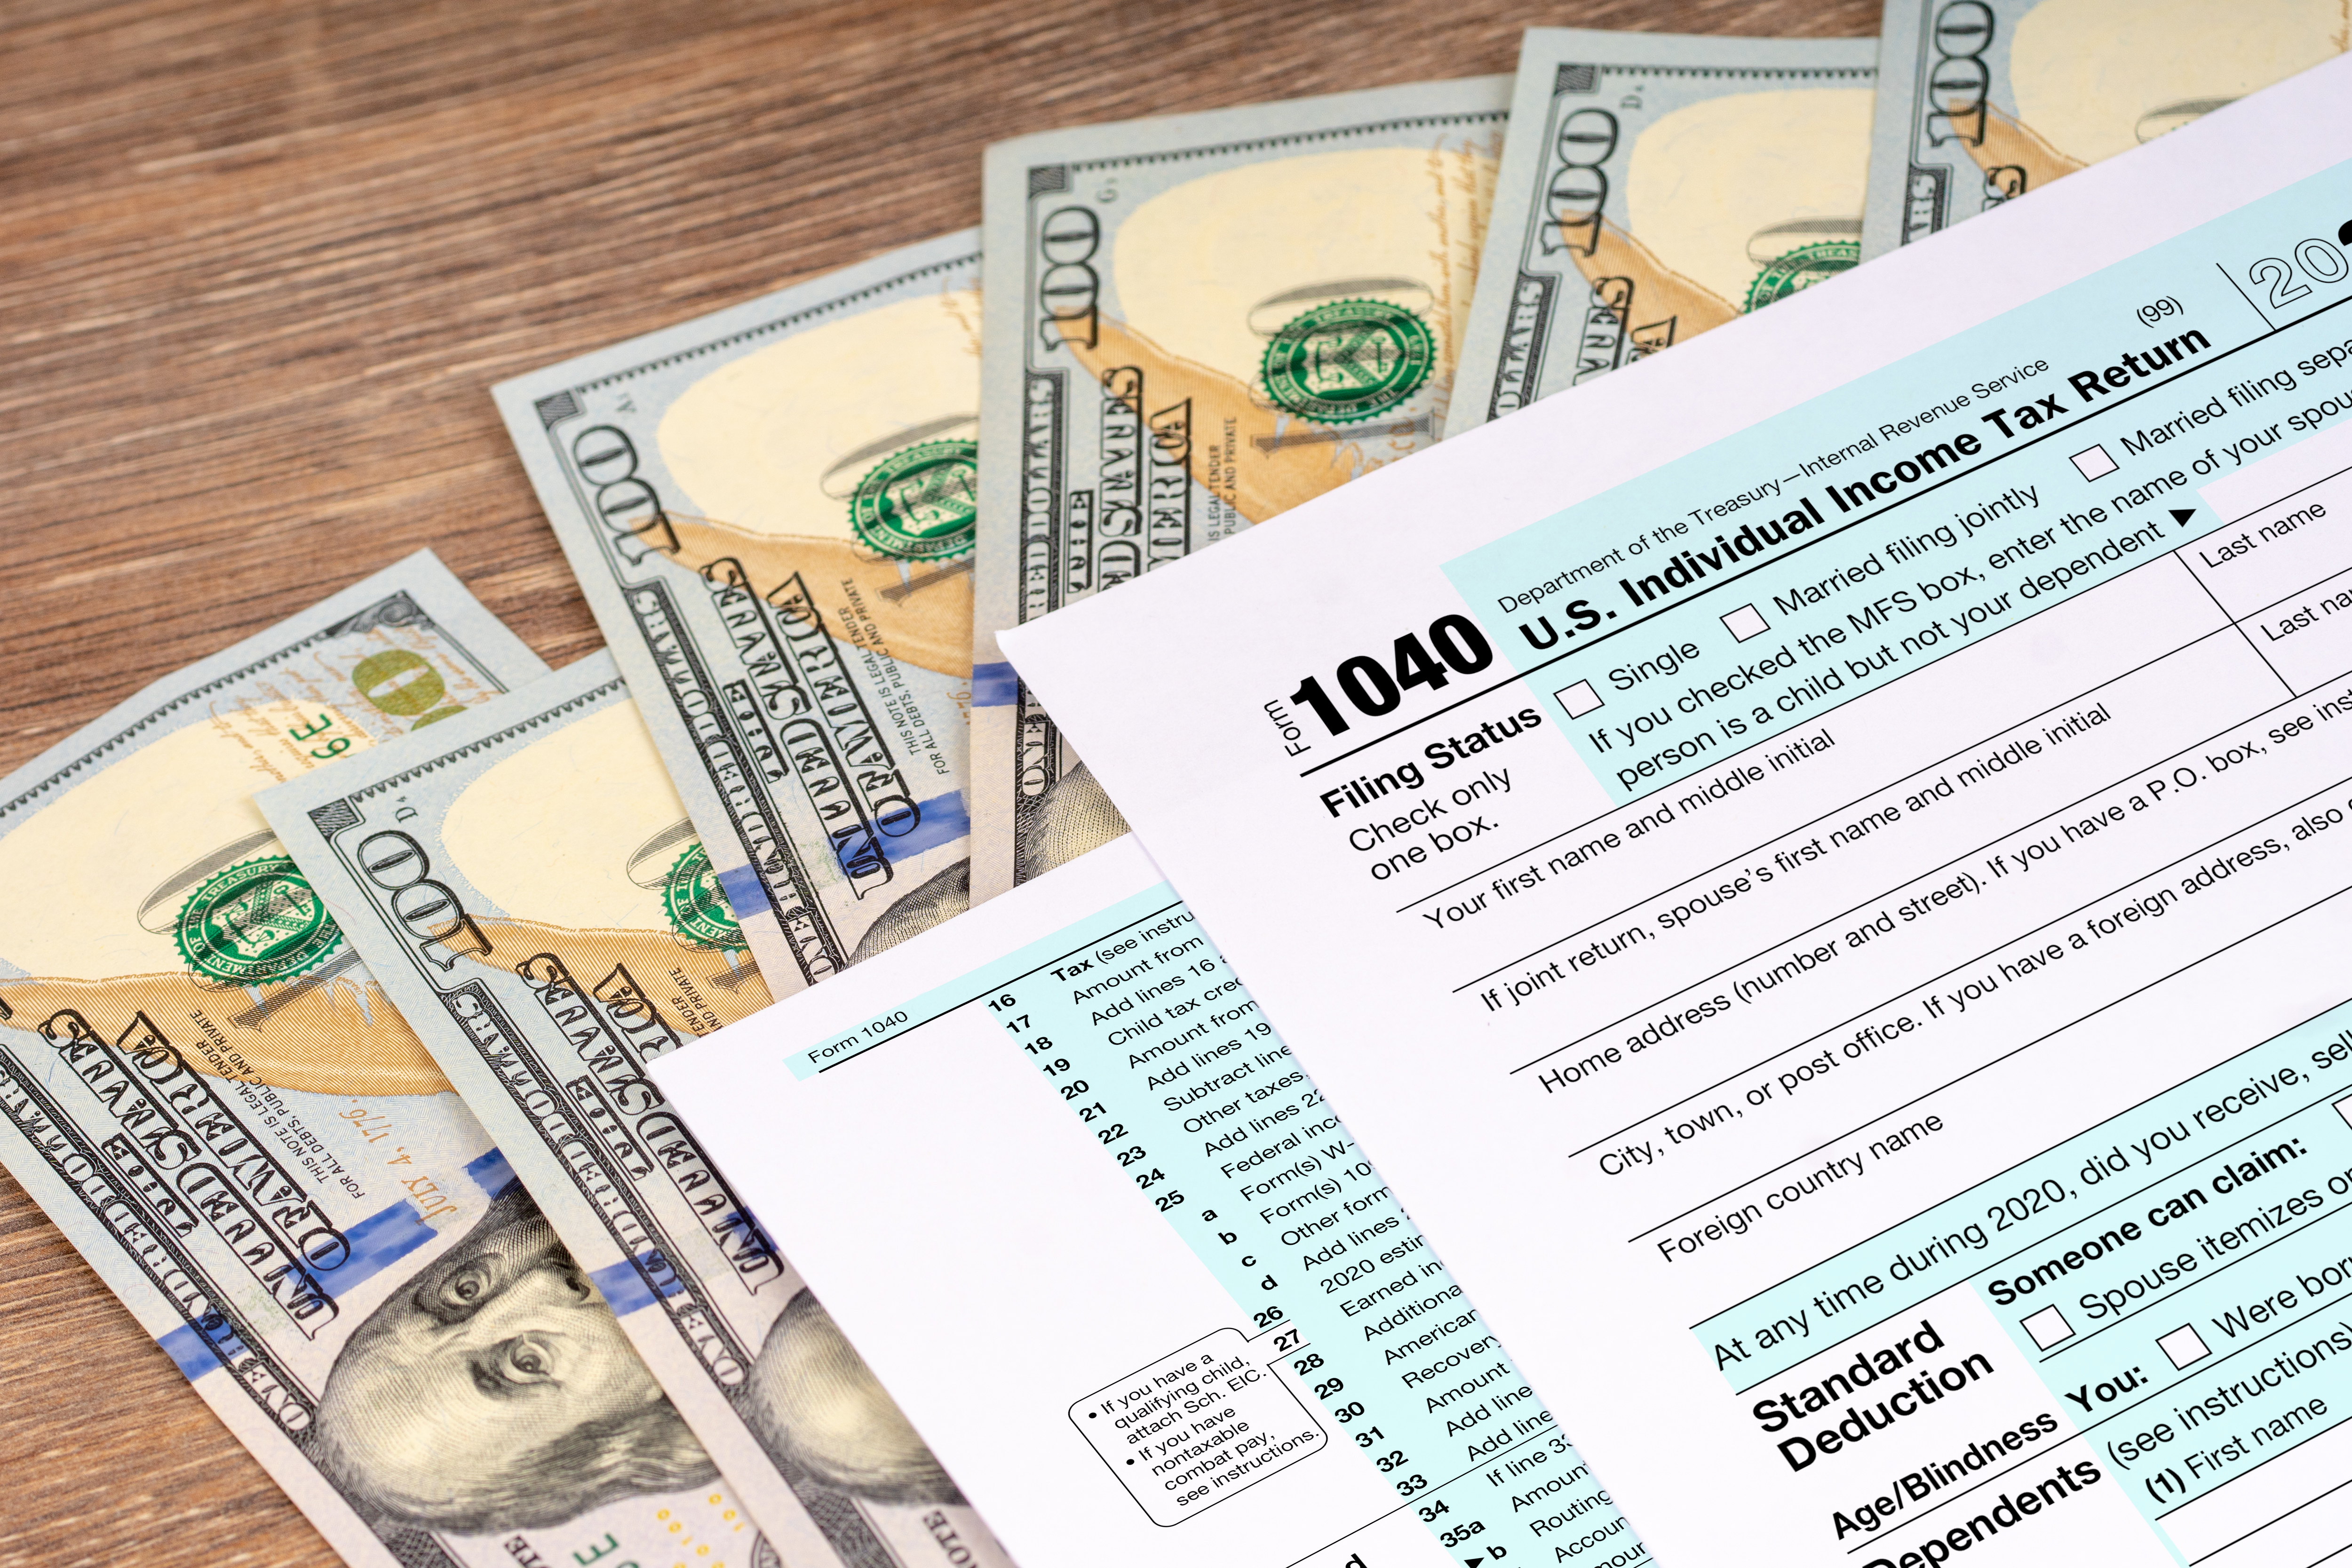 Irs Forms 2022 Schedule 1 Taxes 2022: Important Changes To Know For This Year's Tax Season